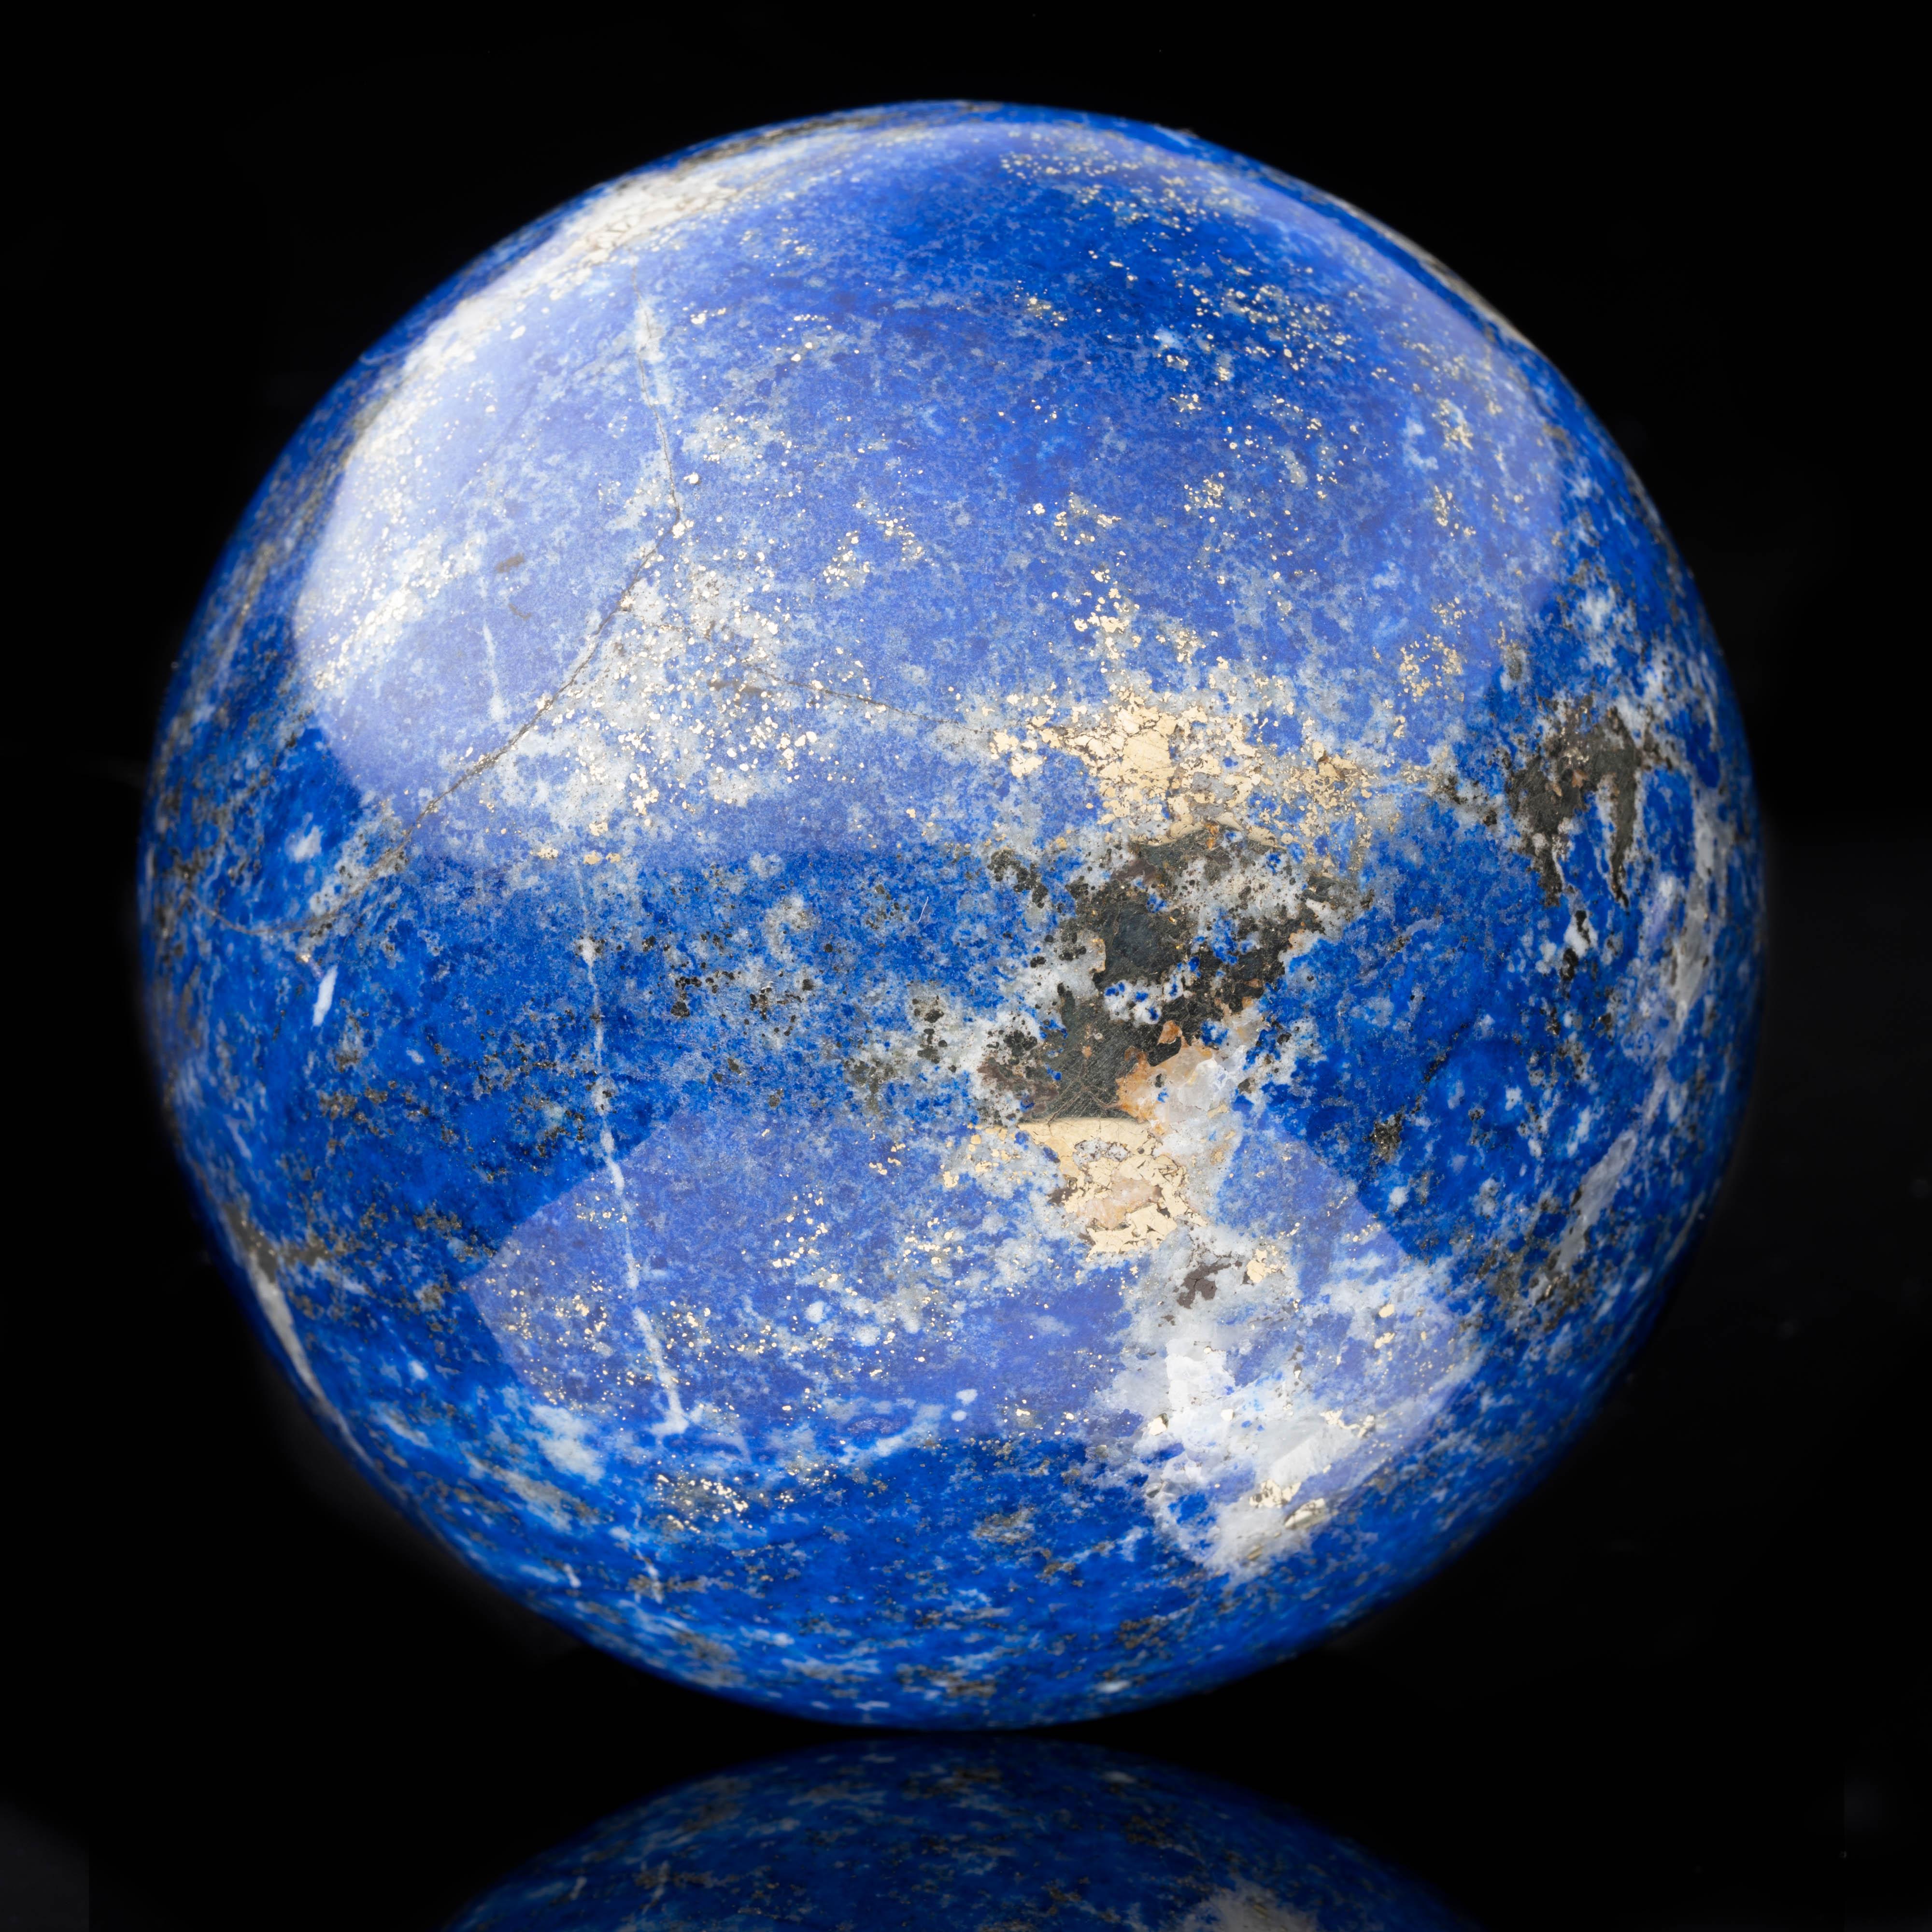 This genuine top-grade 2.29-pound lapis lazuli sphere has been hand-carved and hand-polished out of one solid piece of the best color lapis available. From Afghanistan, this specimen features dazzlingly reflective pyrite deposits over a generous